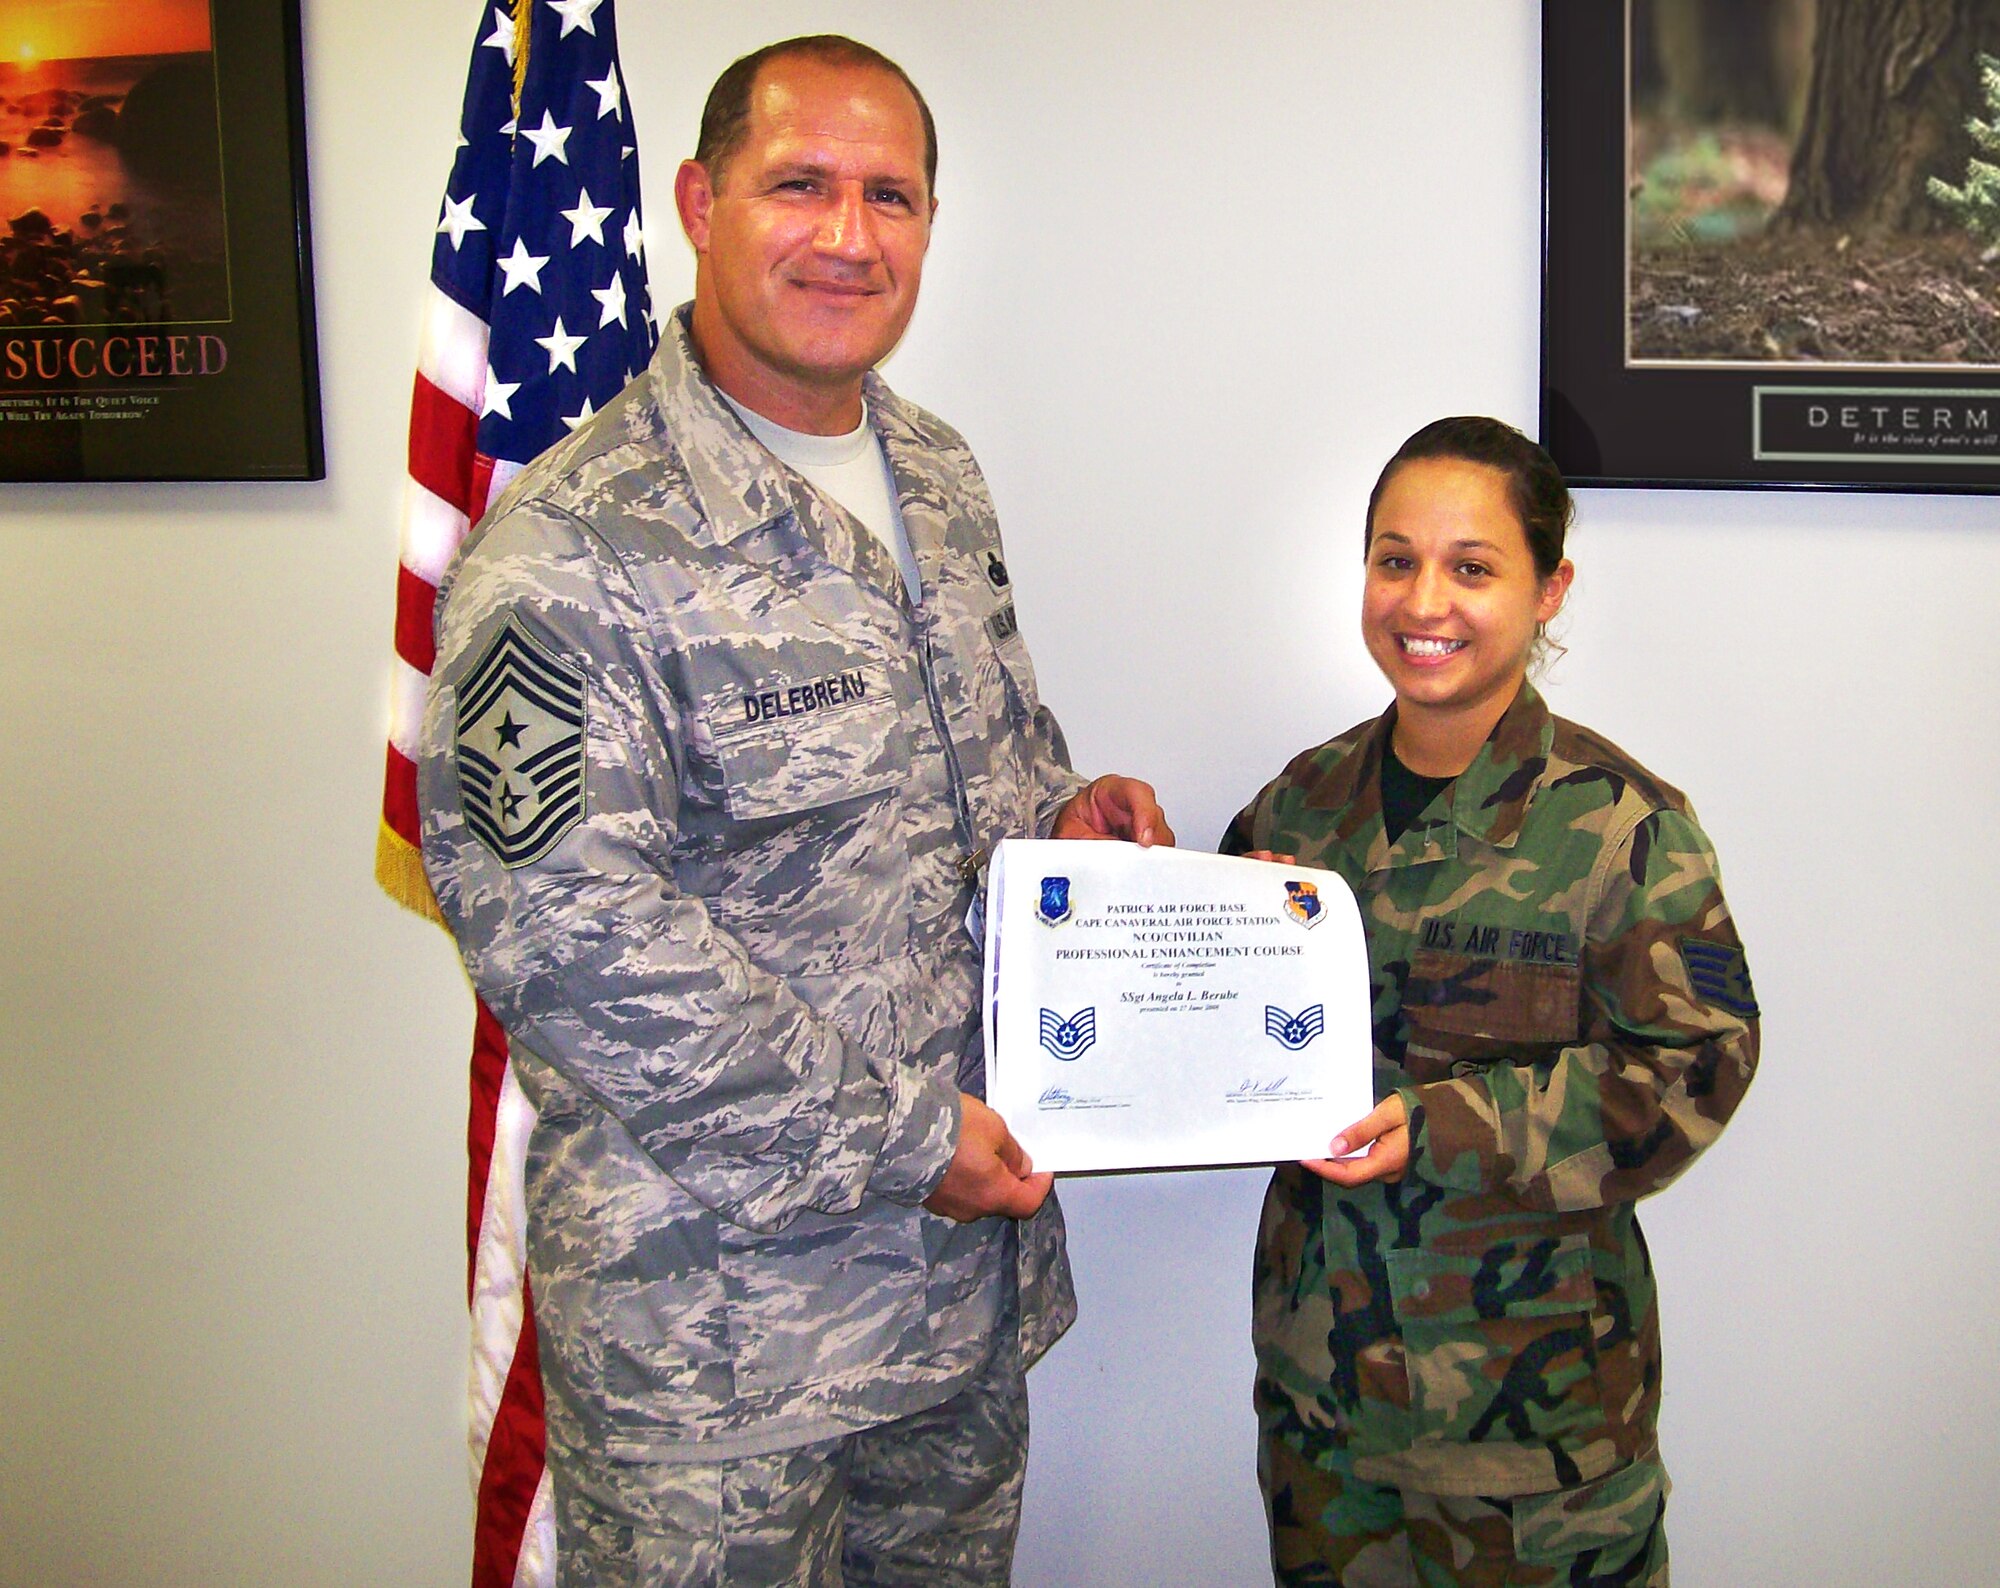 PATRICK AIR FORCE BASE, Fla. -- Staff Sgt. Angela L. Berube, a dietary therapy journeyman, became the first 920th Rescue Wing member to attend the 45th Space Wing's Professional Enhancement Course (PEC) after her graduation June 27. Wing Command Chief Master Sgt. Gerald Delebreau, also pictured, enouraged all Reserve junior NCOs to attend the four-day class, which covers a range of subjects such as ethics, mentoring, team-building and motivation, fitness, career progression, bullet-statement writing, air-expeditionary force, thrift savings plan, counseling and the seven habits of highly effective people, just to name a few. Sergeant Berube is a member of the 920th Aeromedical Staging Squadron here. (U.S. Air Force photo/Master Sgt. Jonathan Green)